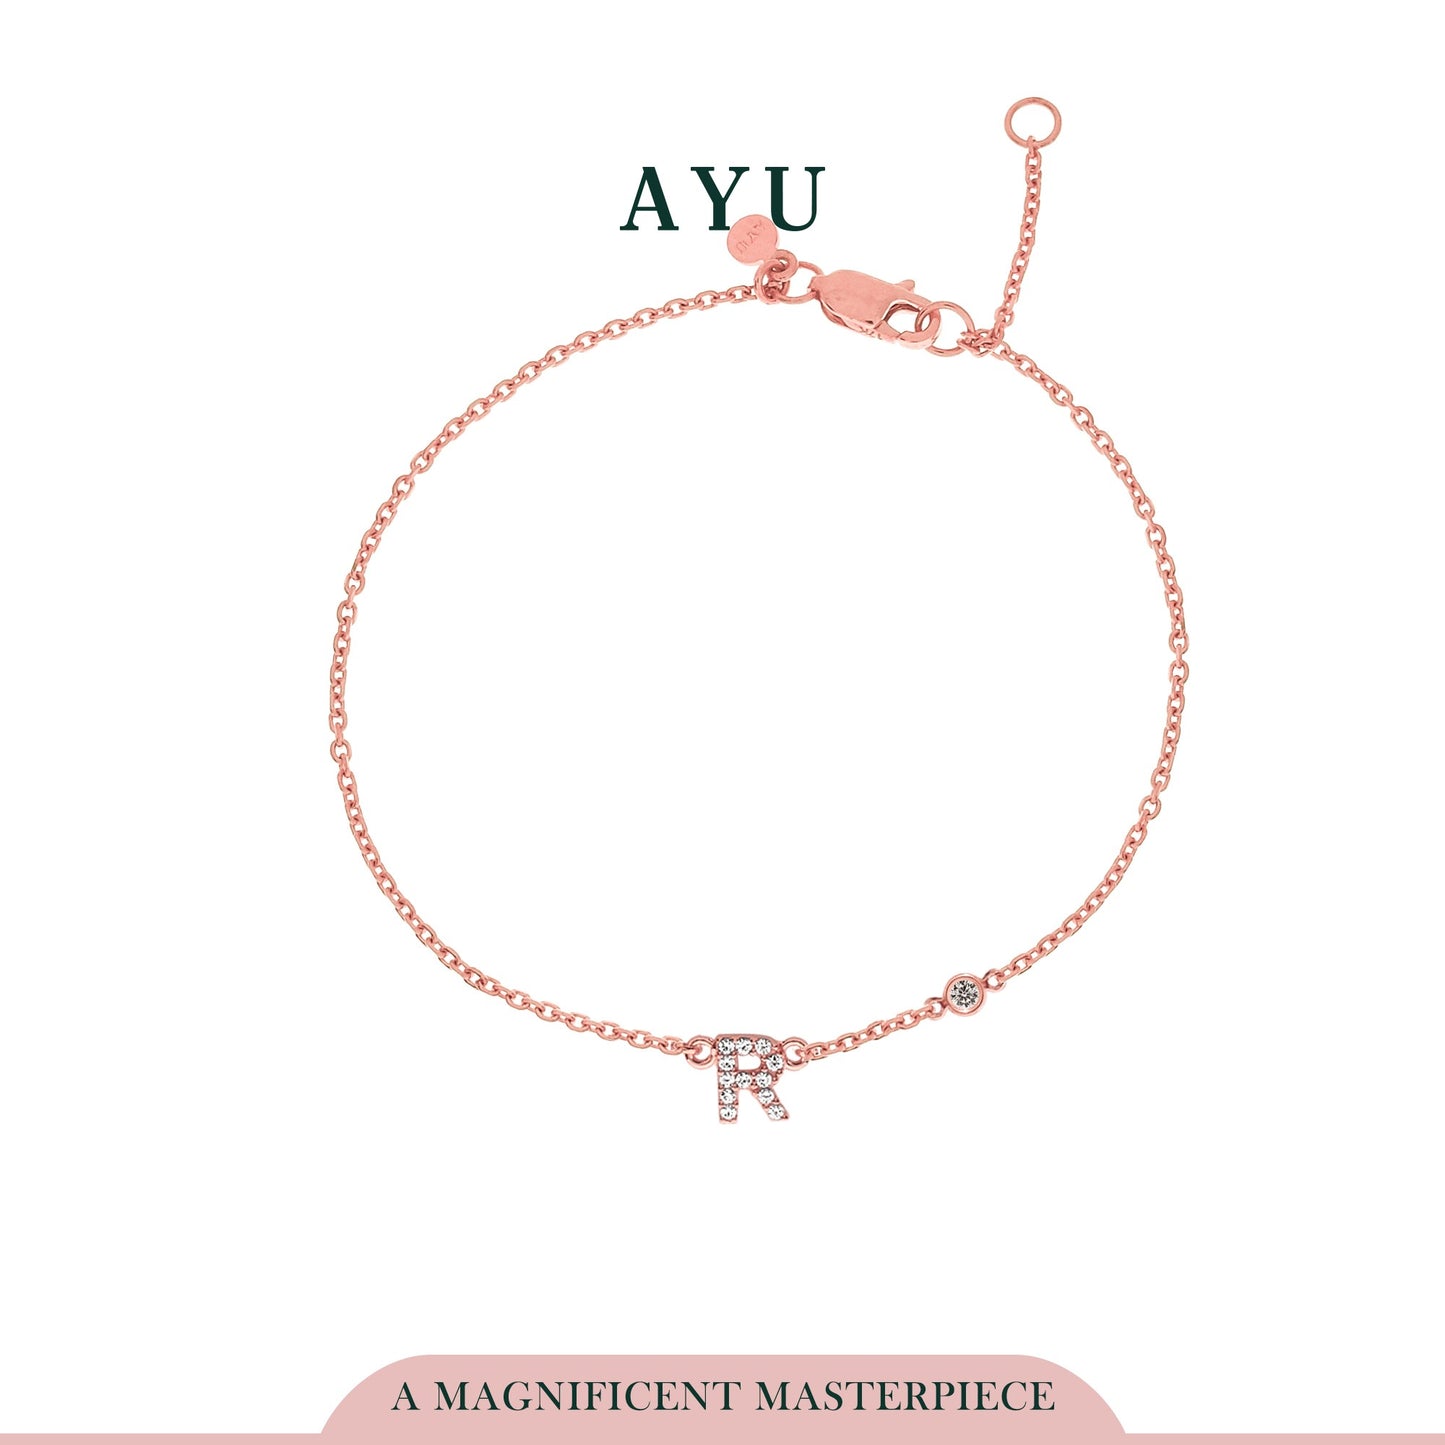 AYU Pave Initial With Bezel Chain Bracelet 17k Rose Gold